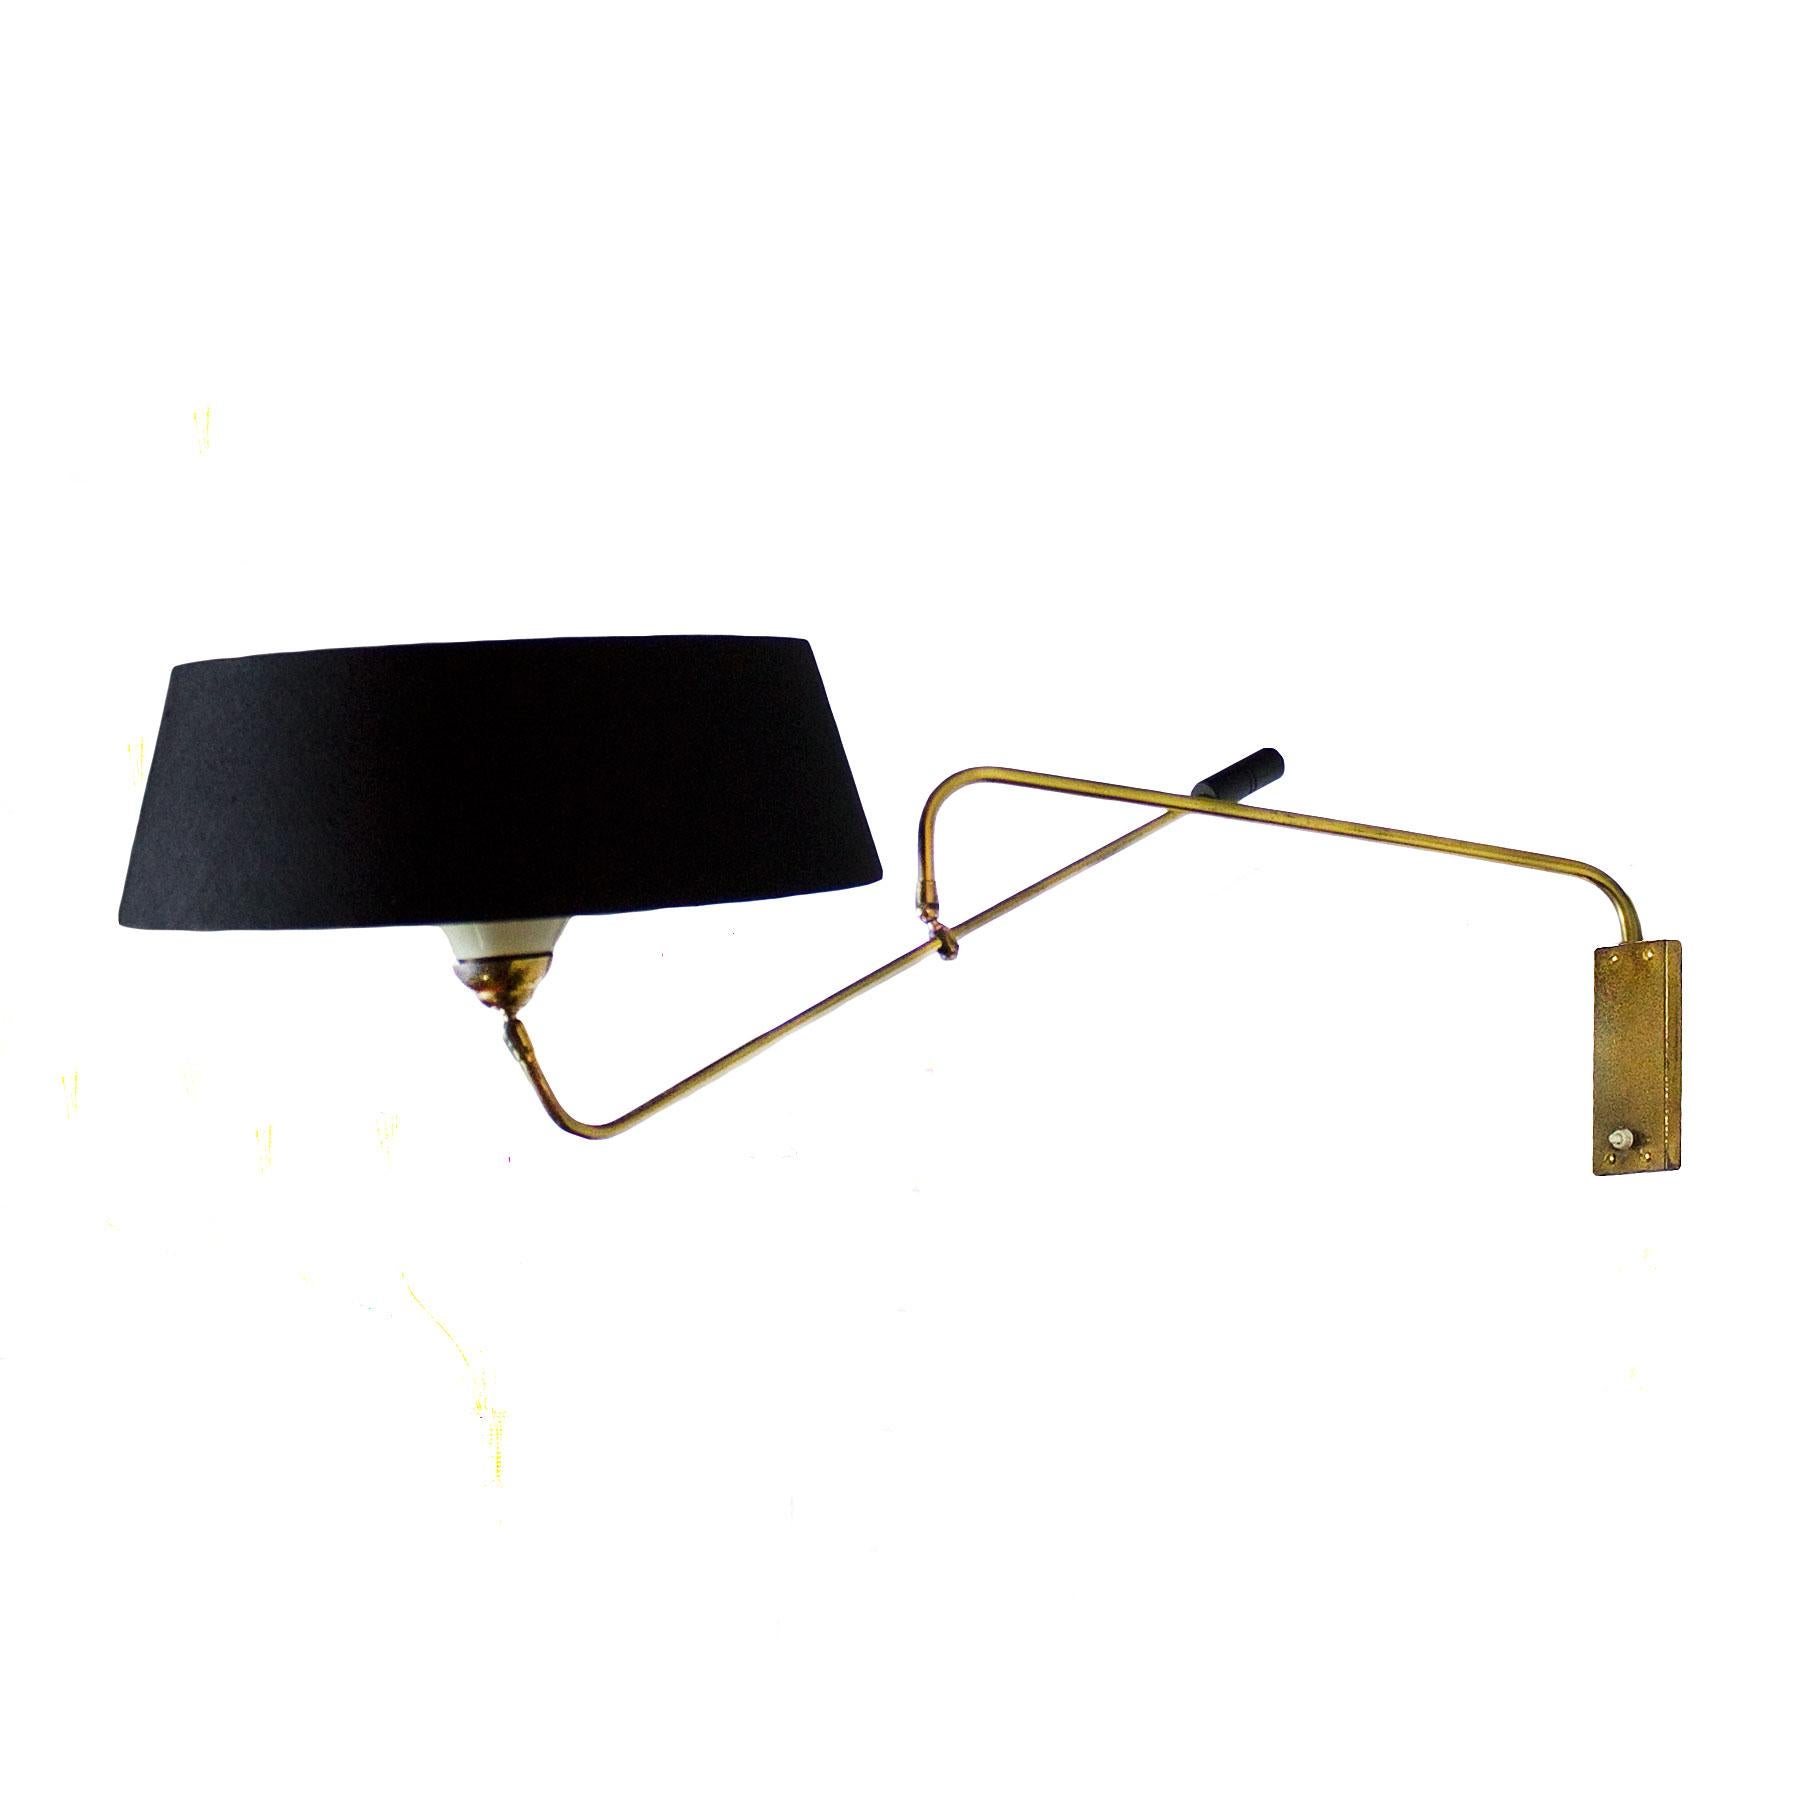 French Big Mid-Century Modern Wall Light by Maison Lunel, Brass, Steel, Perspex -France For Sale